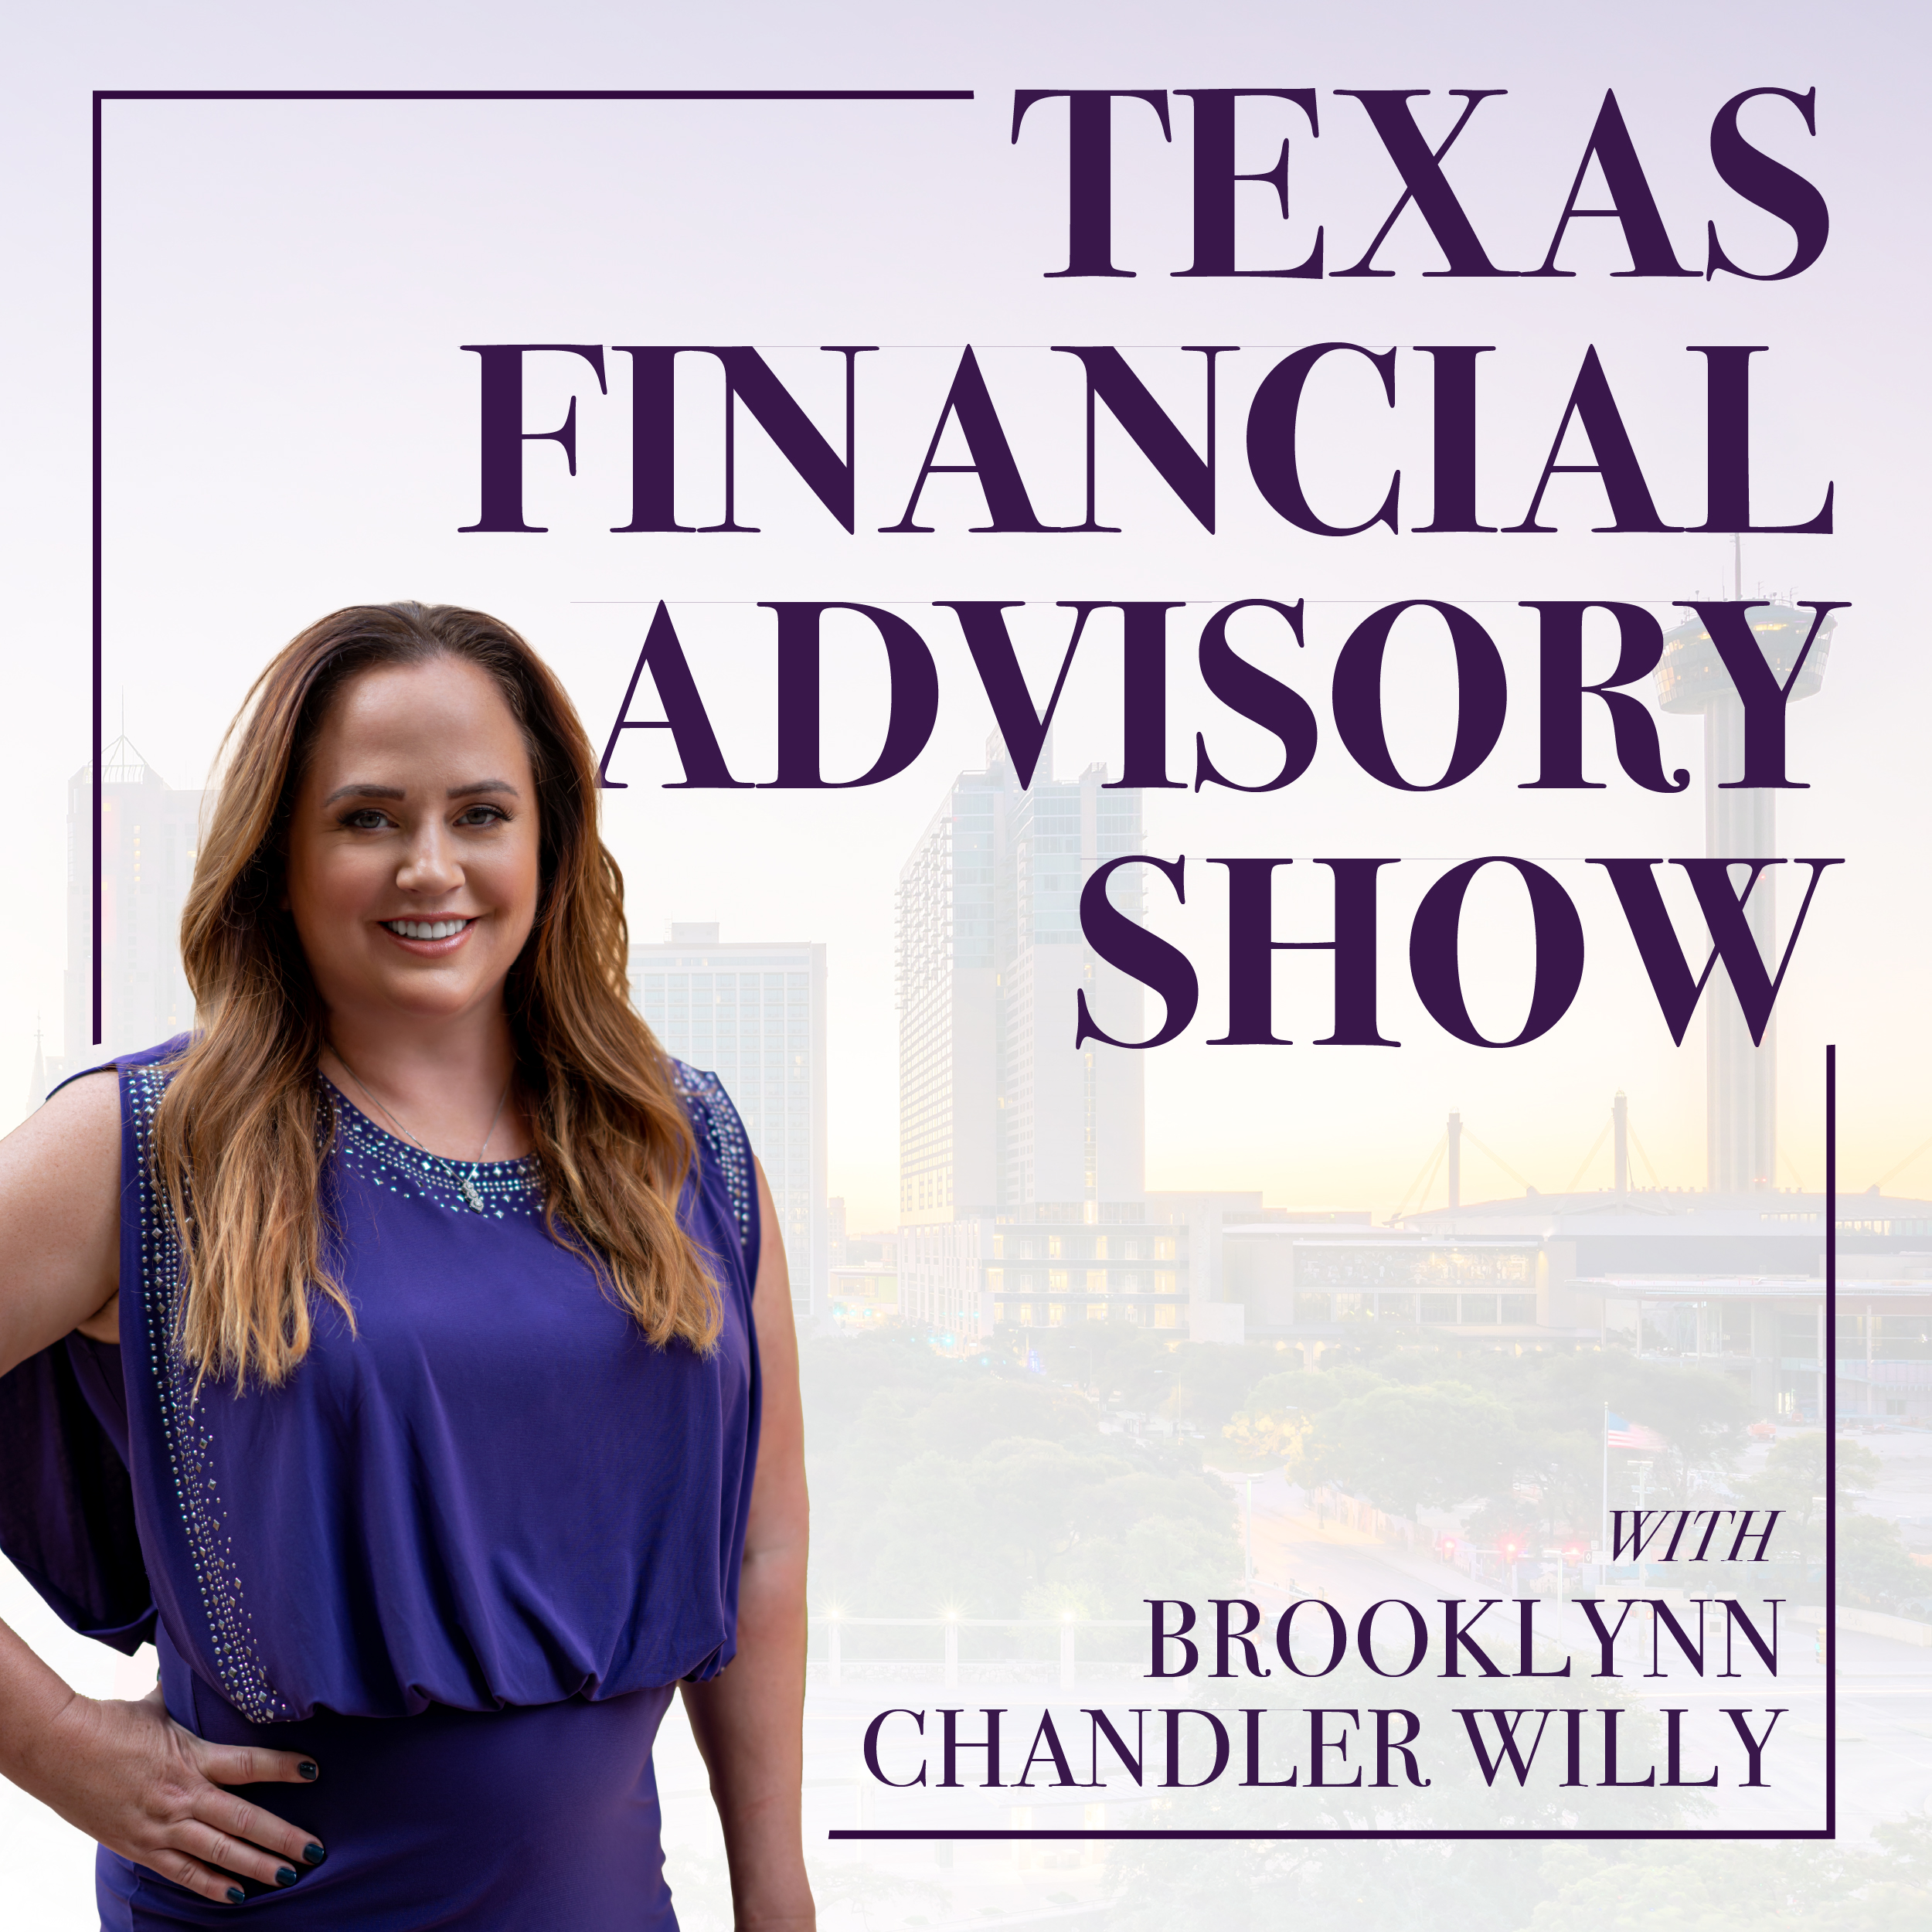 Texas Financial Advisory Group This week Brooklynn and her team discuss Retirement Income Cash Flow Plans and share some great client stories.